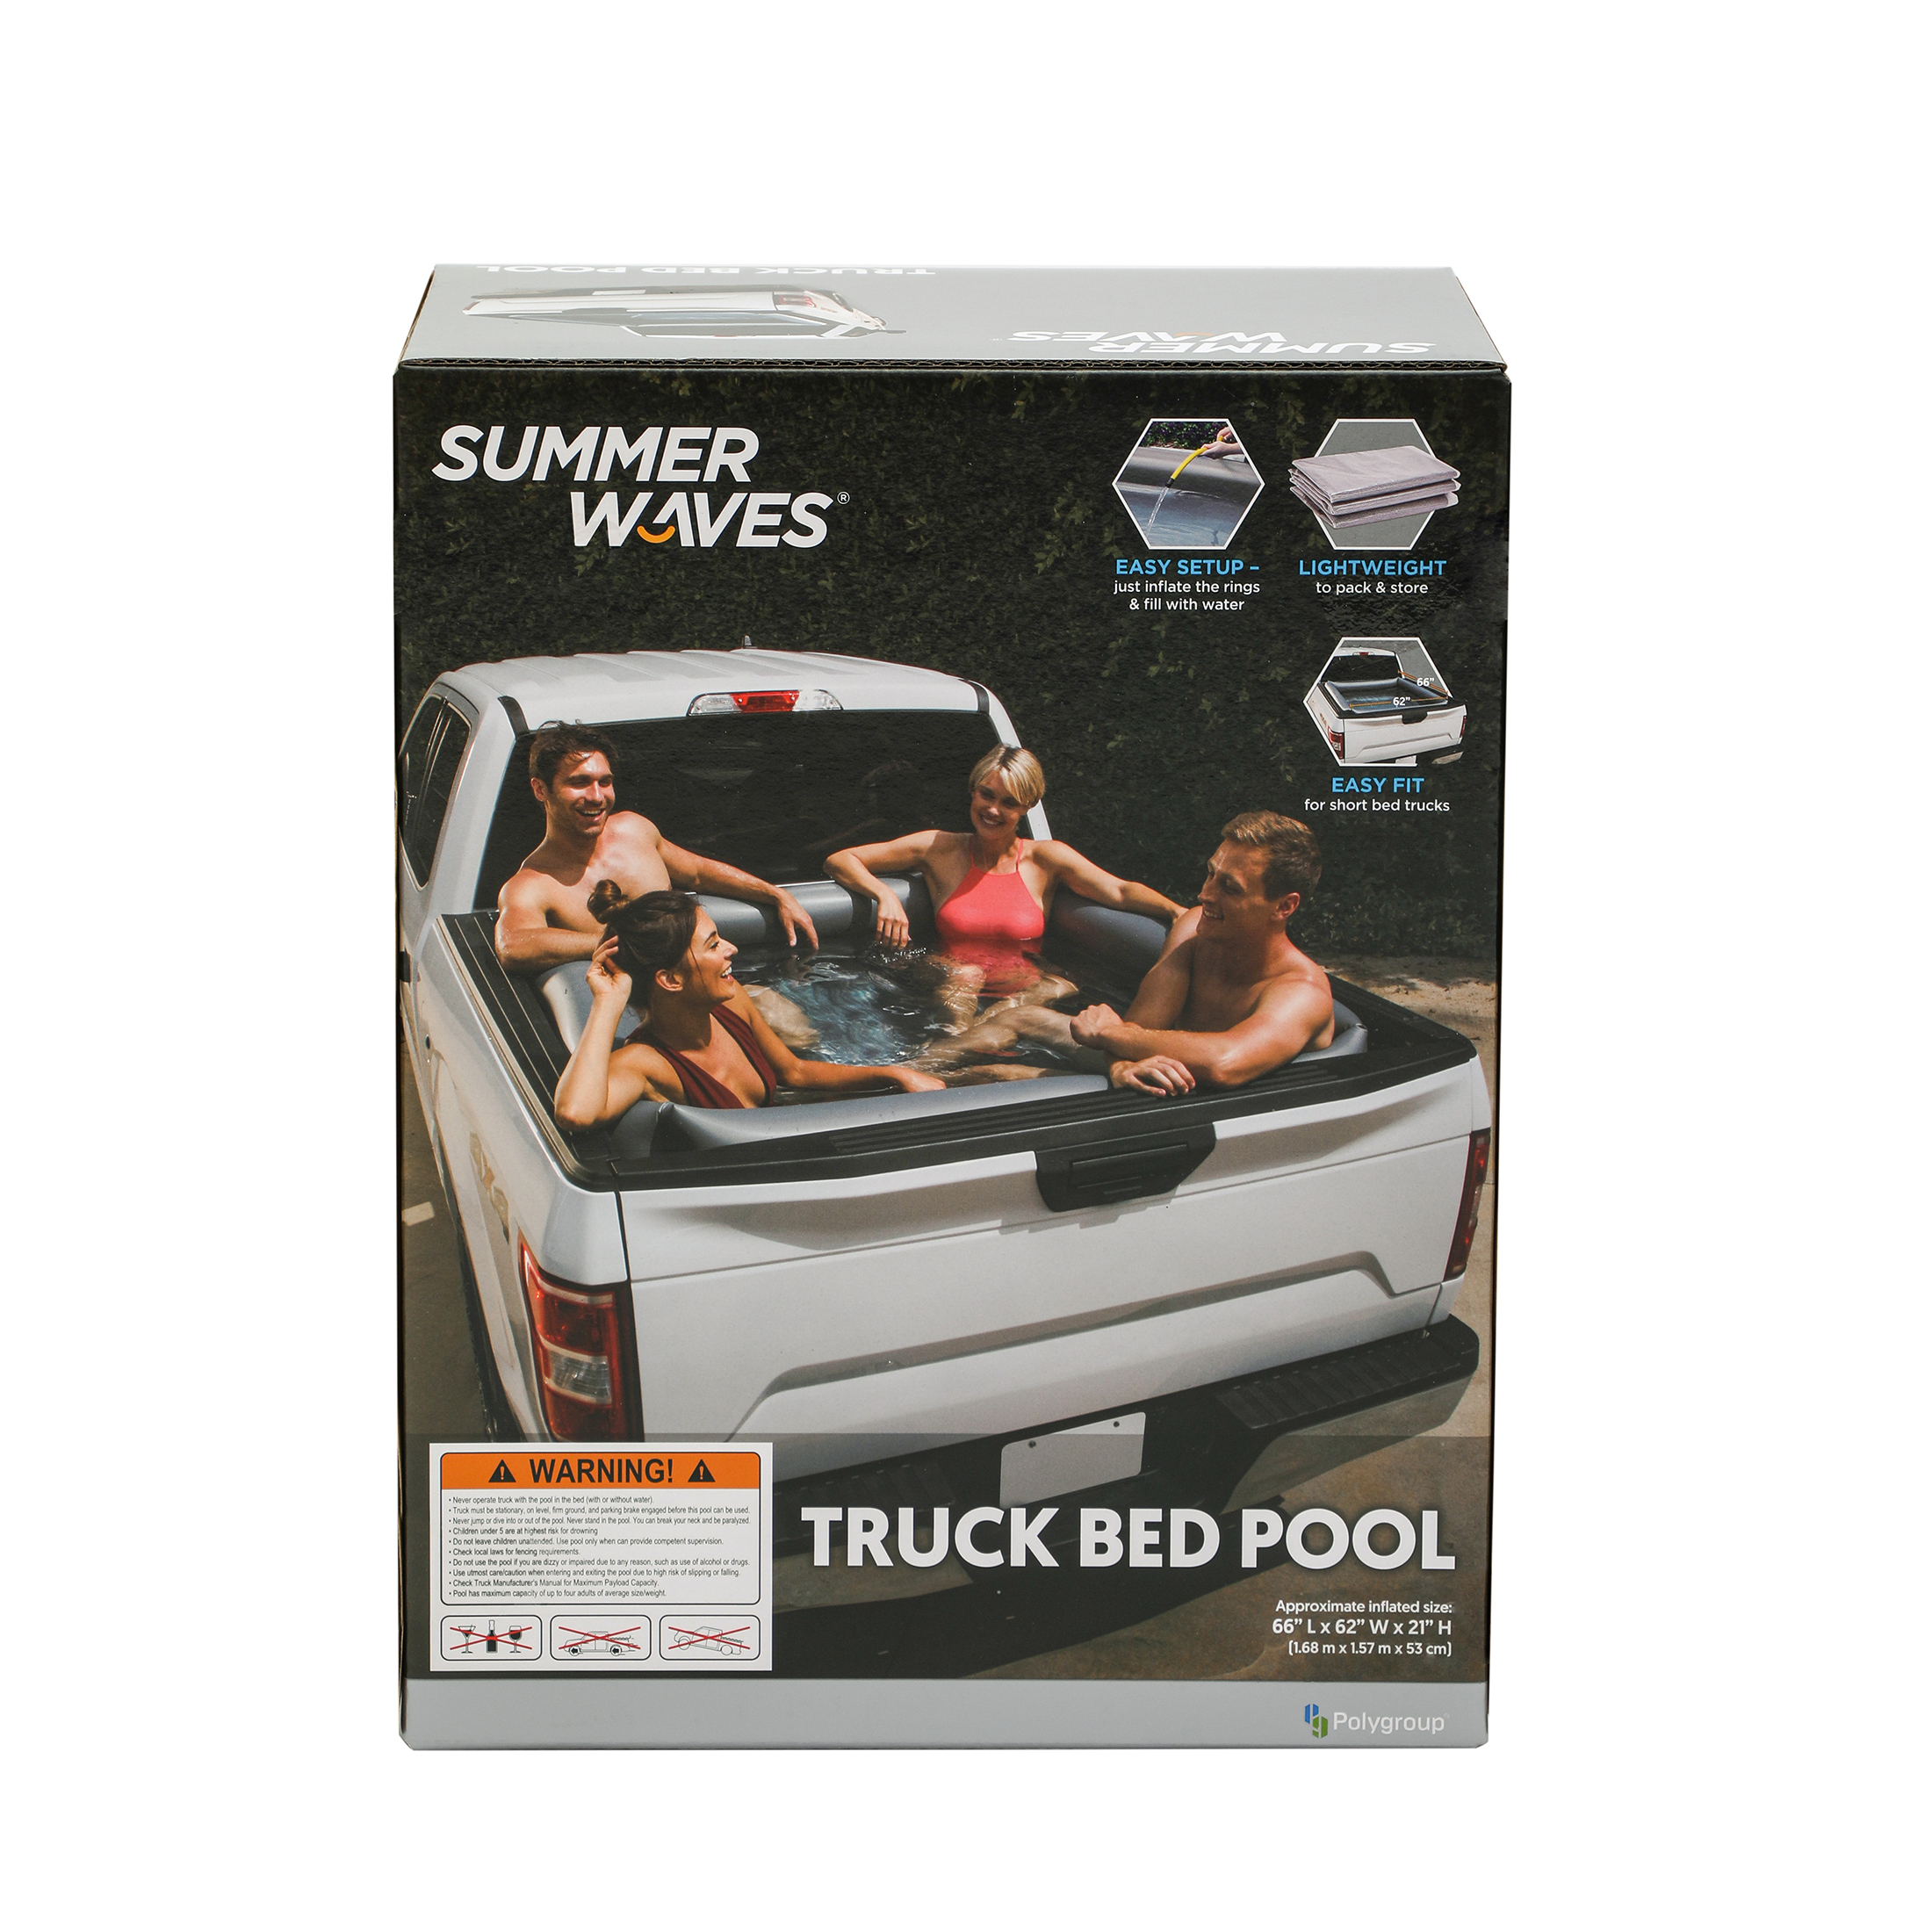 Summer Waves Rectangular Inflatable Truck Bed Pool, Gray, Adults, Unisex - image 6 of 7